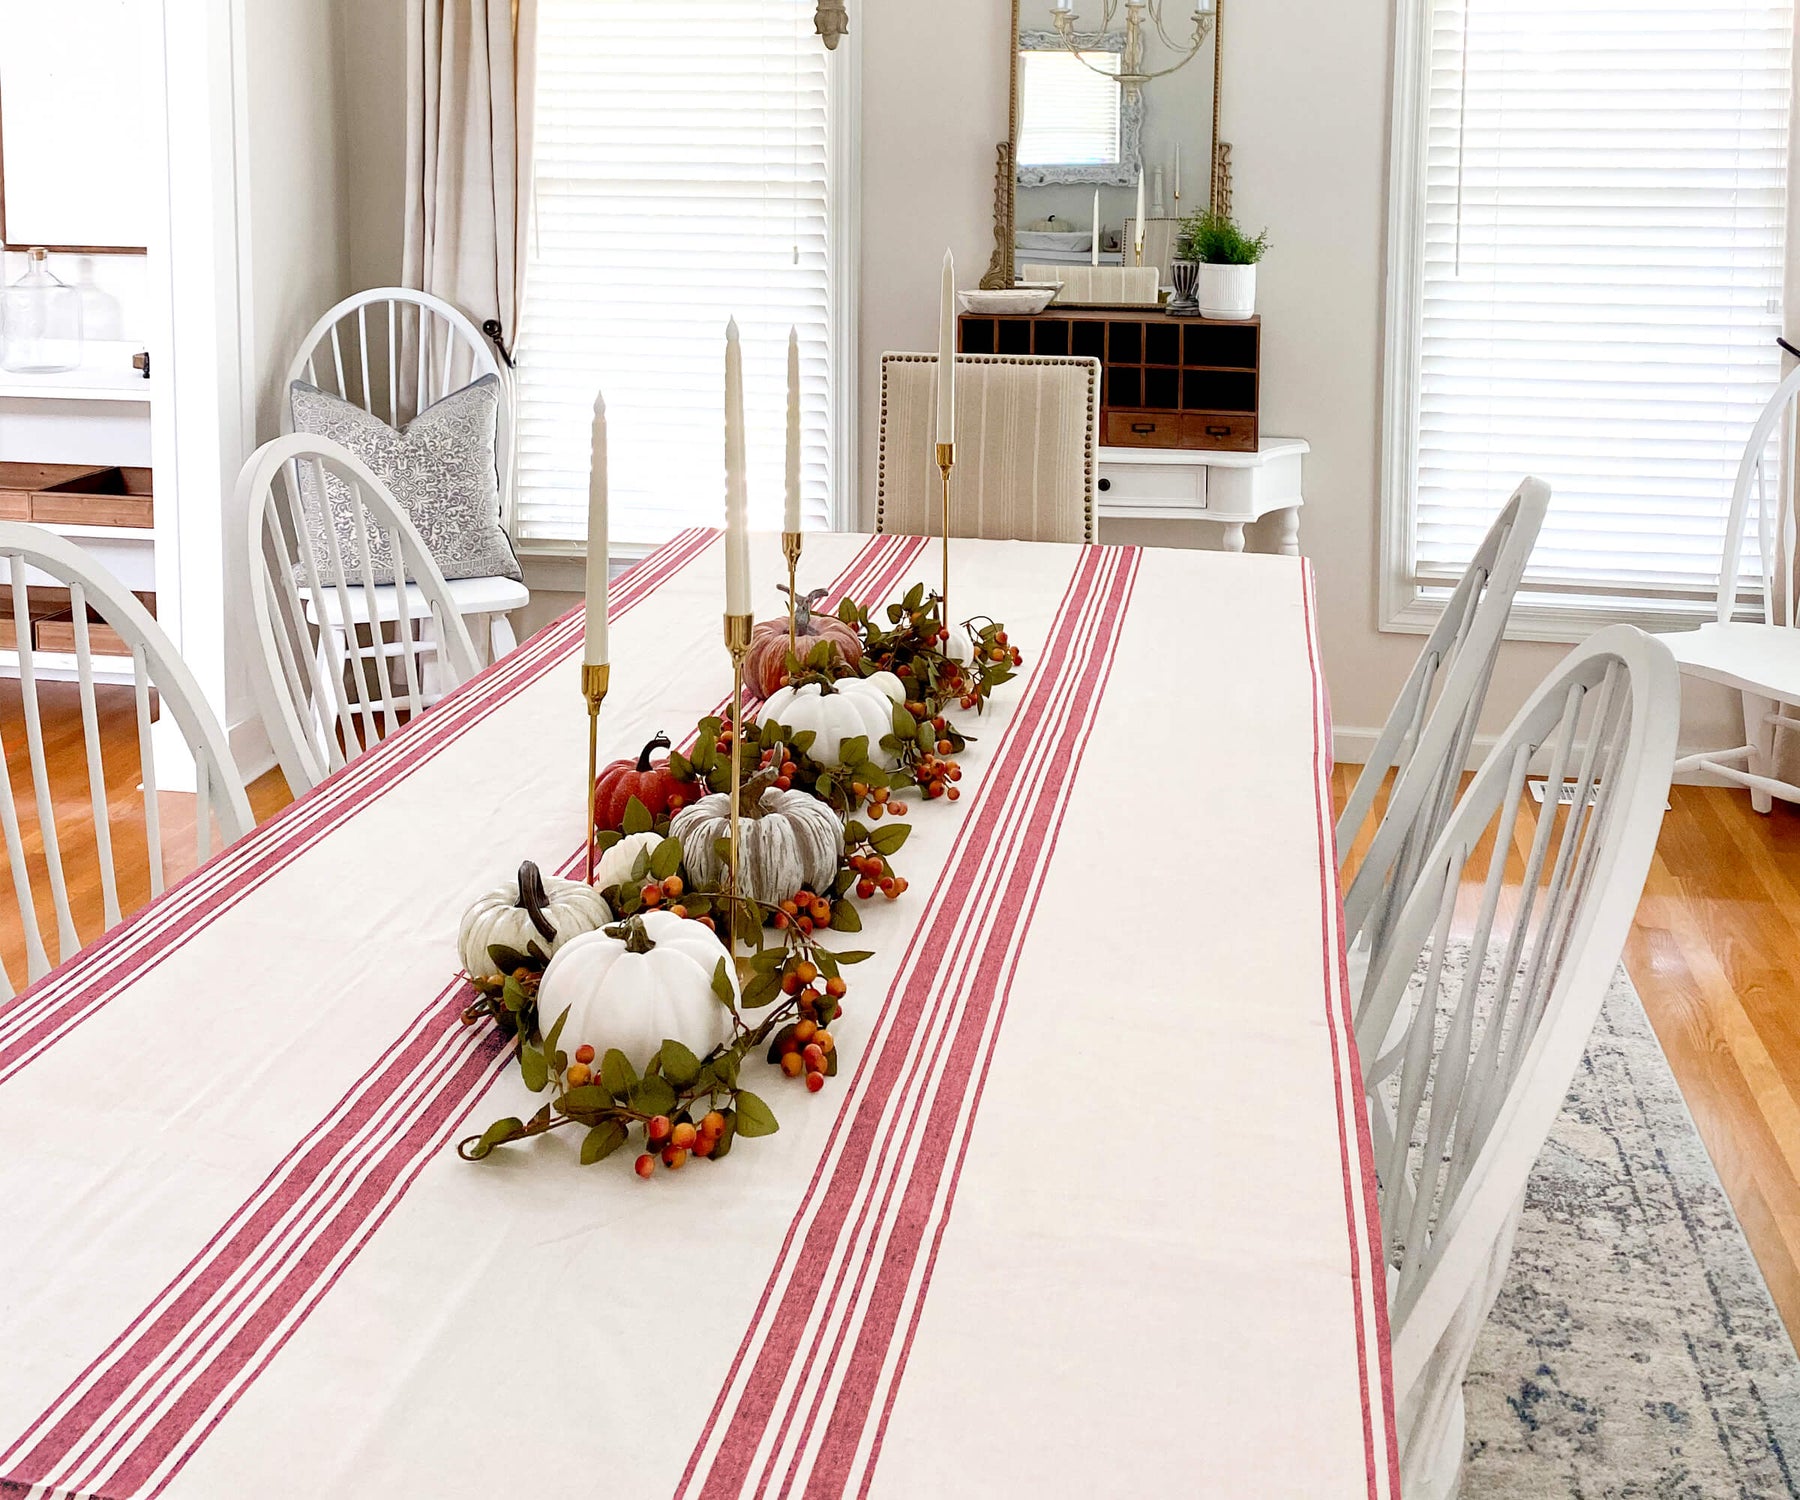 Dining table adorned with red and white striped Farmhouse tablecloth